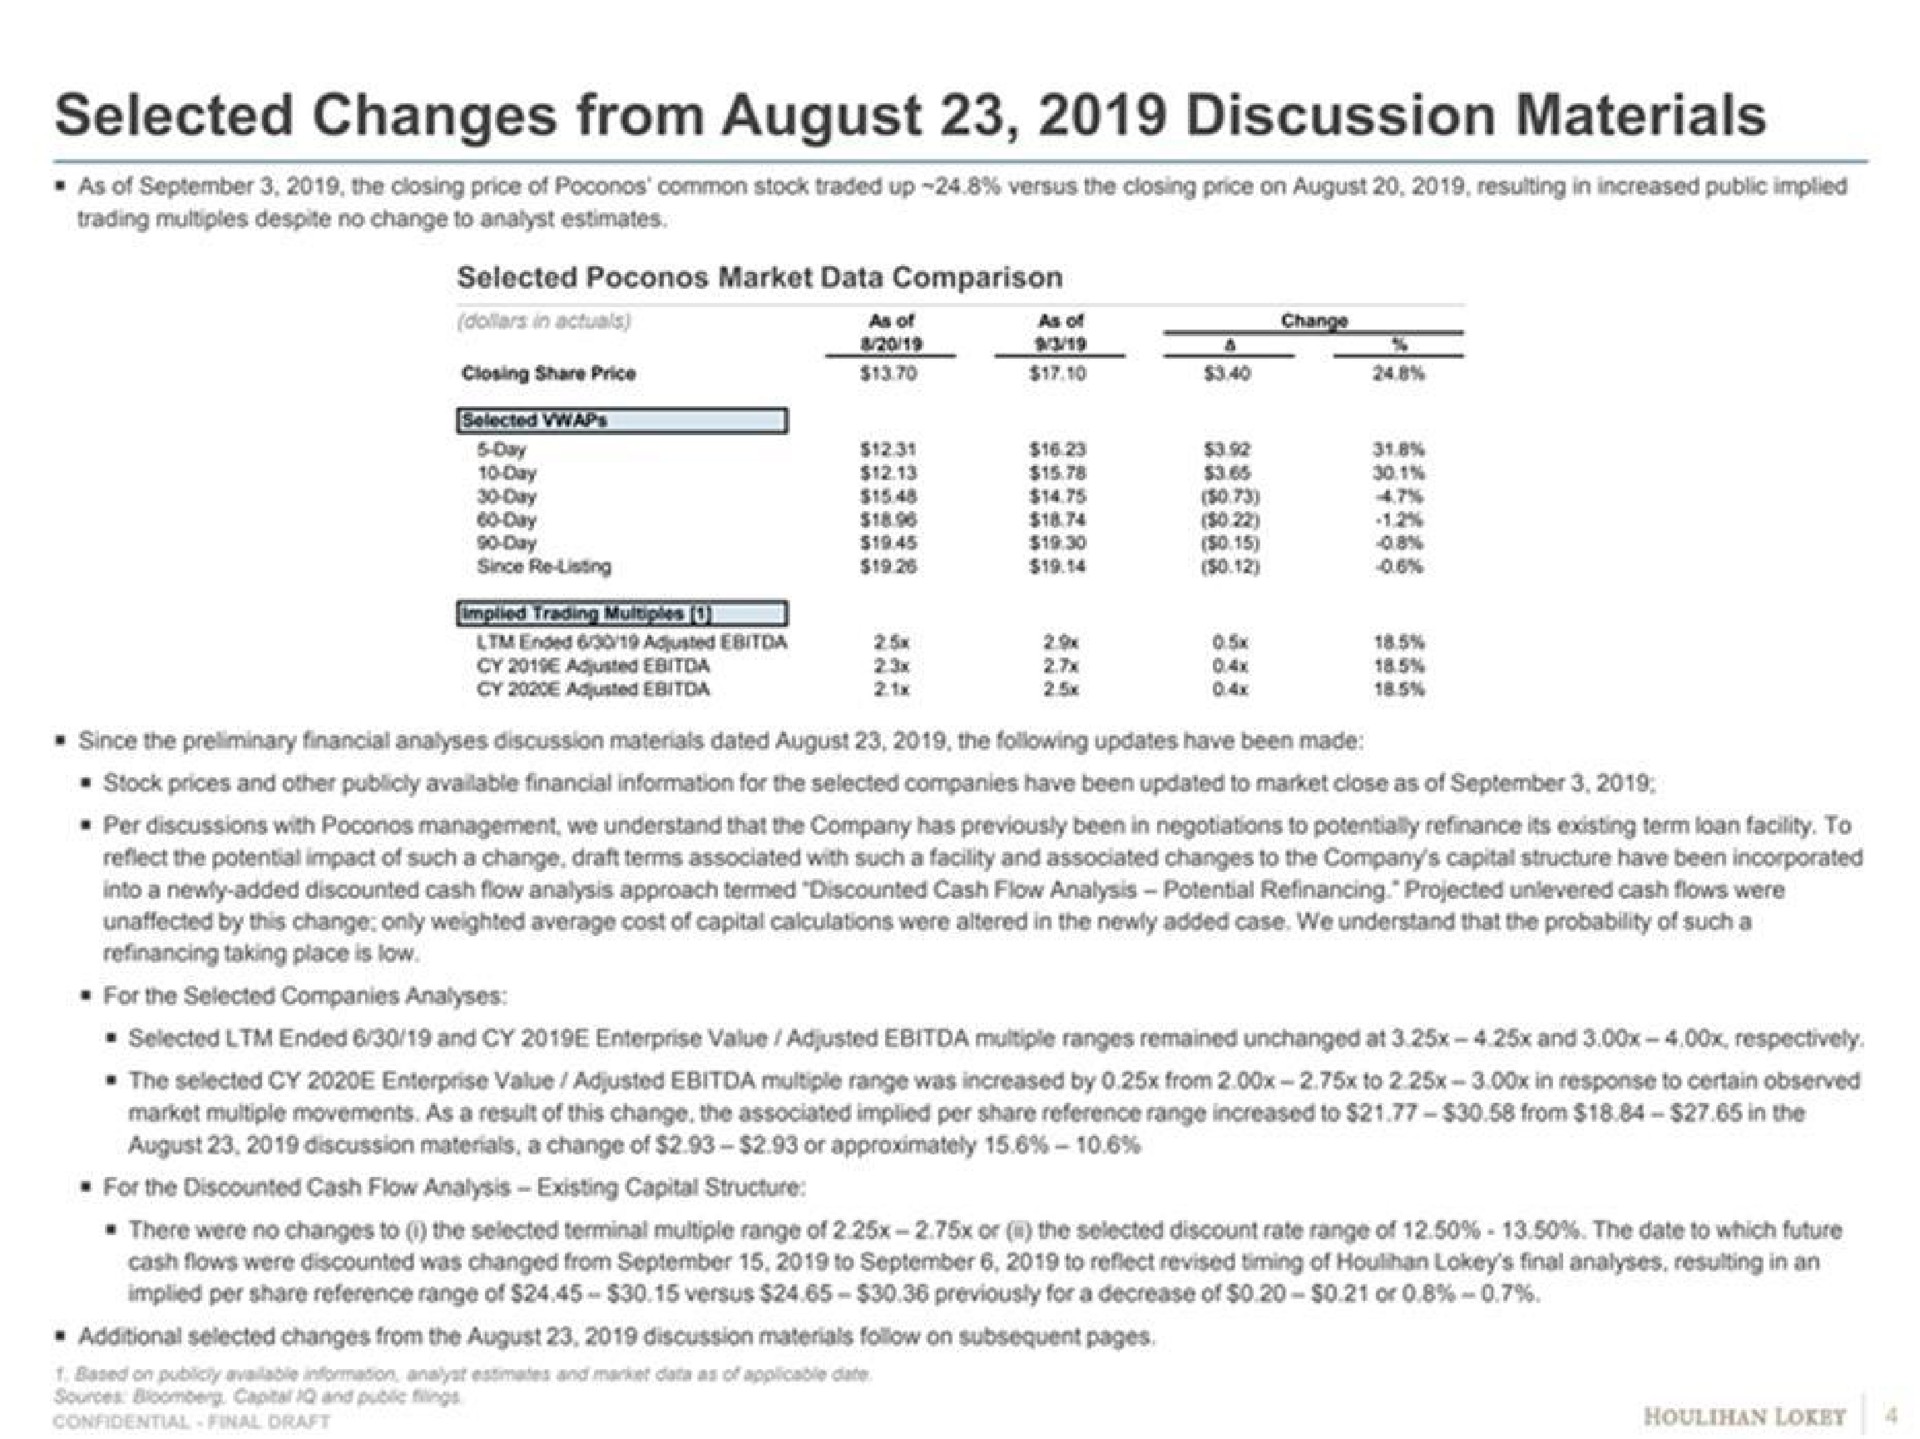 selected changes from august discussion materials | Goldman Sachs